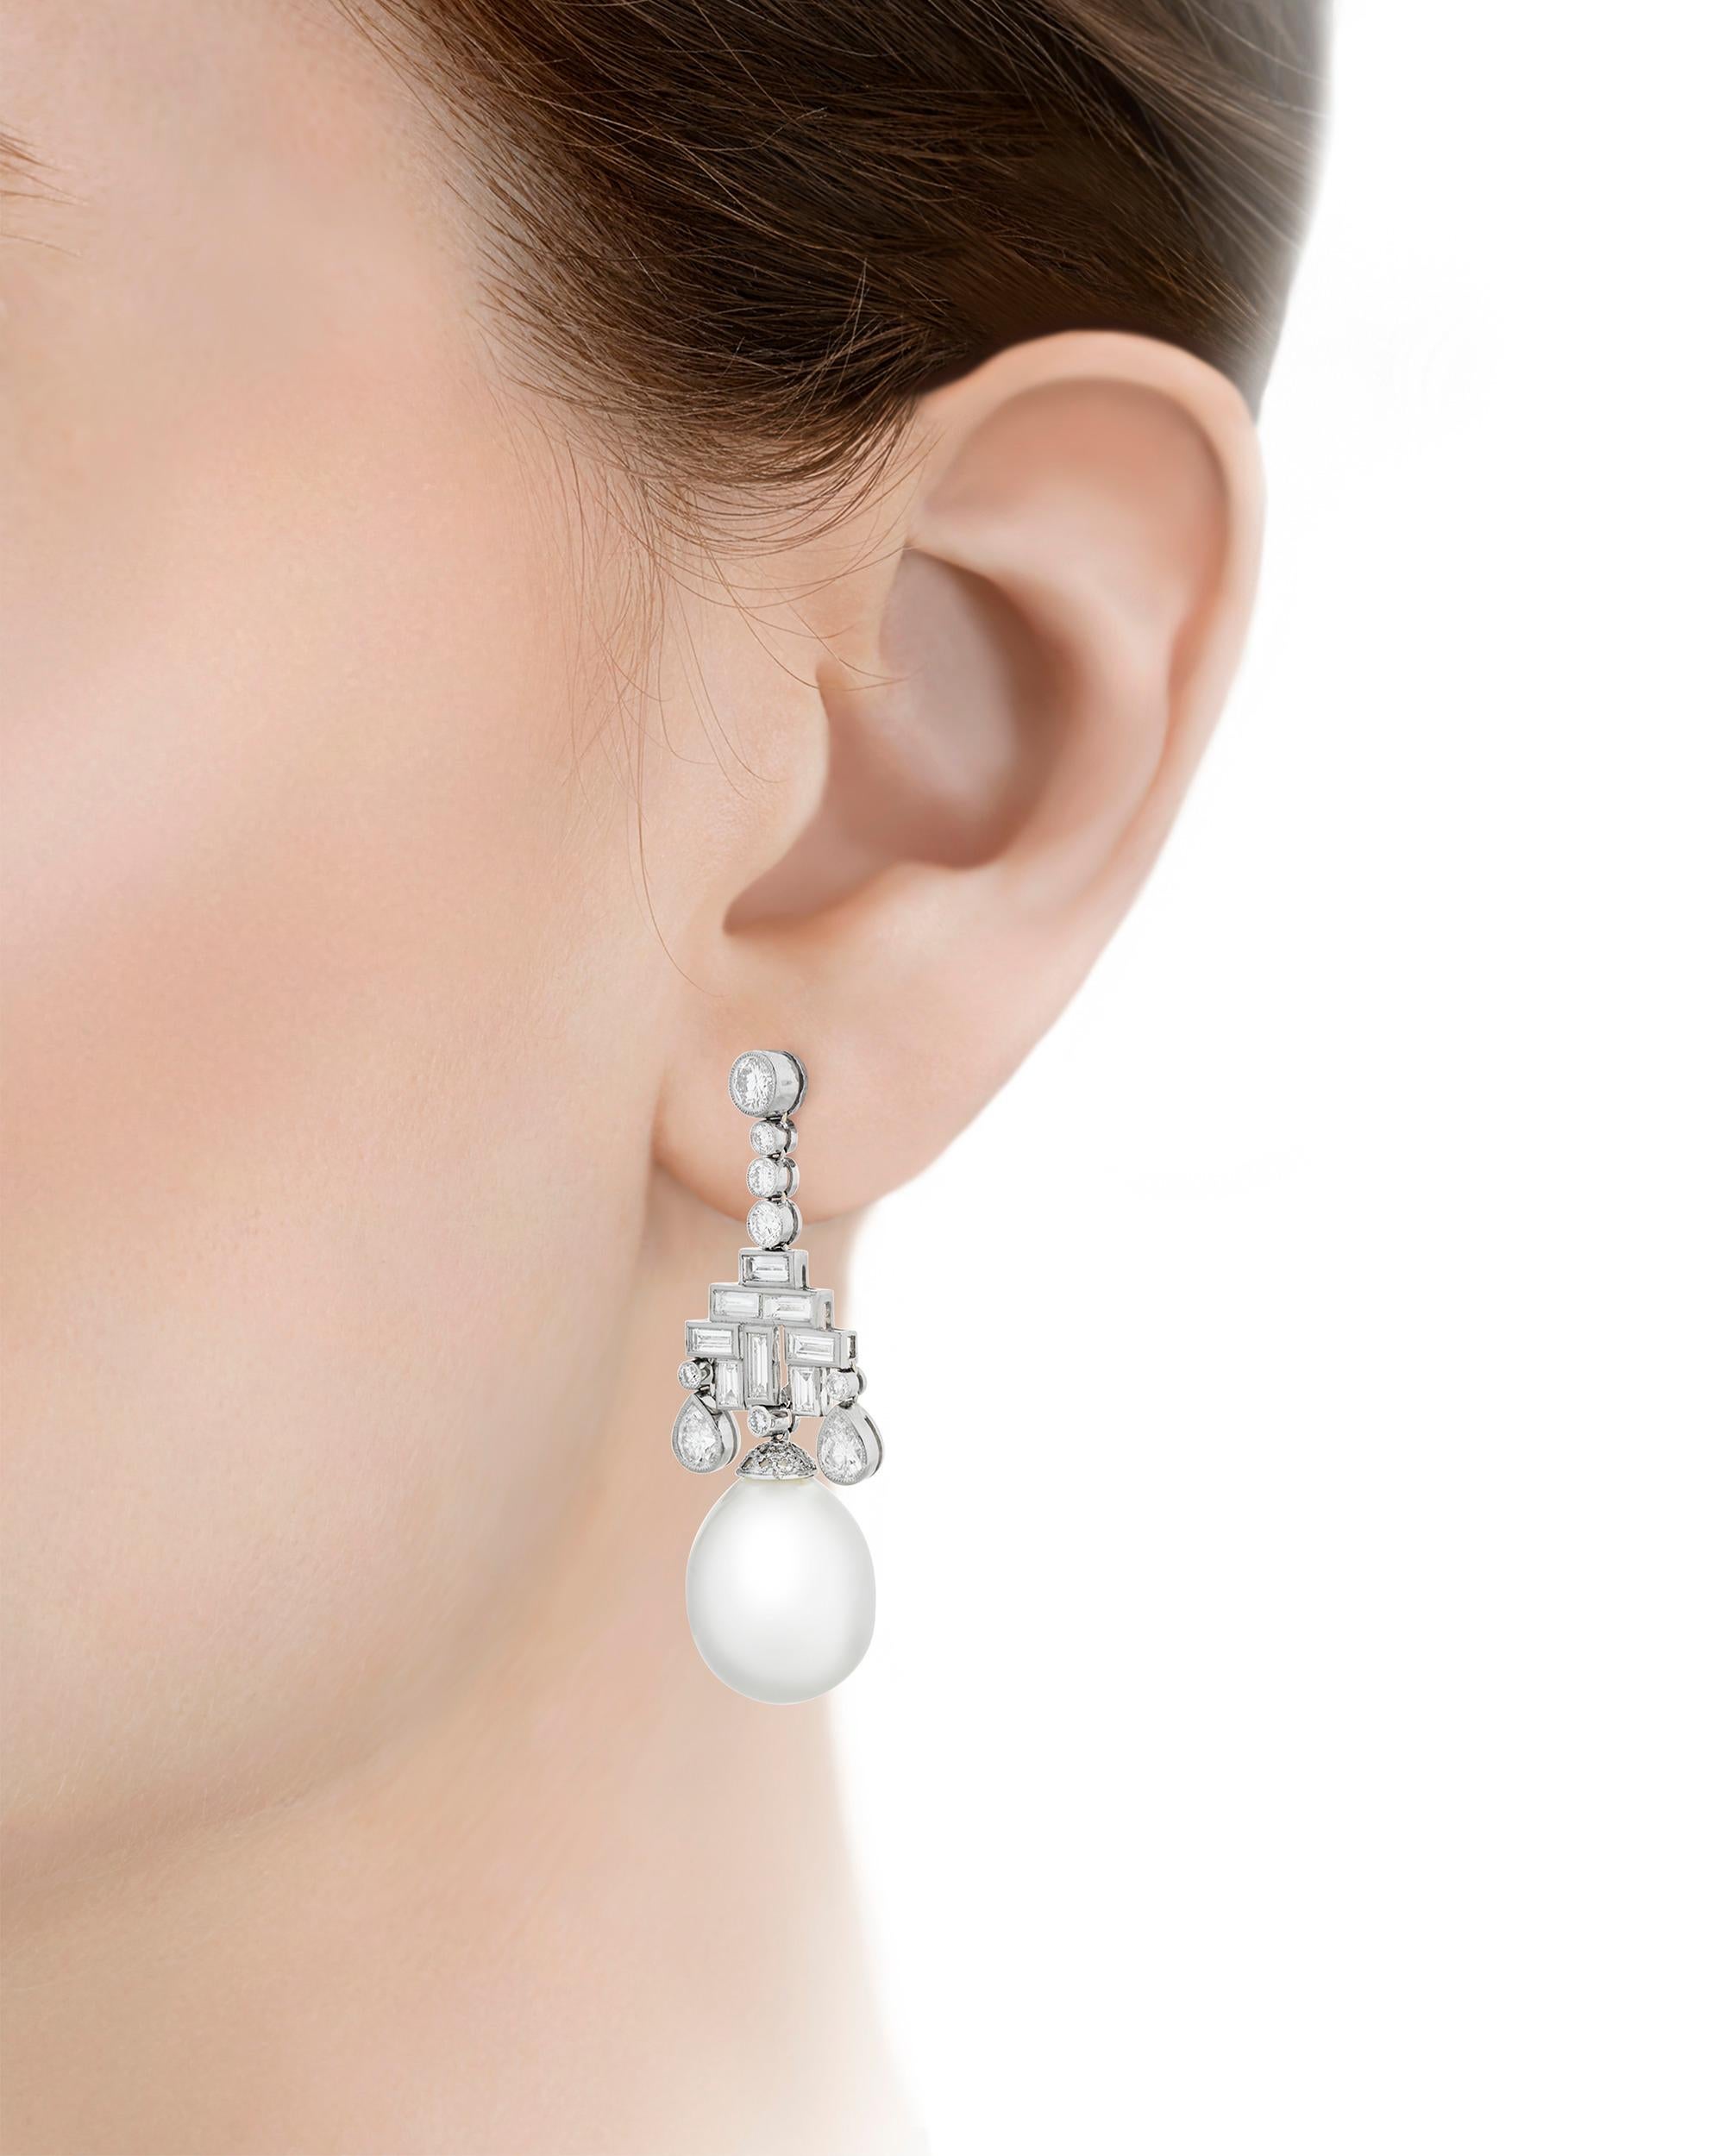 A pair of rare South Sea pearls measuring 18mm x 13.5mm dangle elegantly from these drop earrings. Their lustrous white hue is beautifully complemented by approximately 4.00 total carats of white diamonds in their platinum setting. Handcrafted and